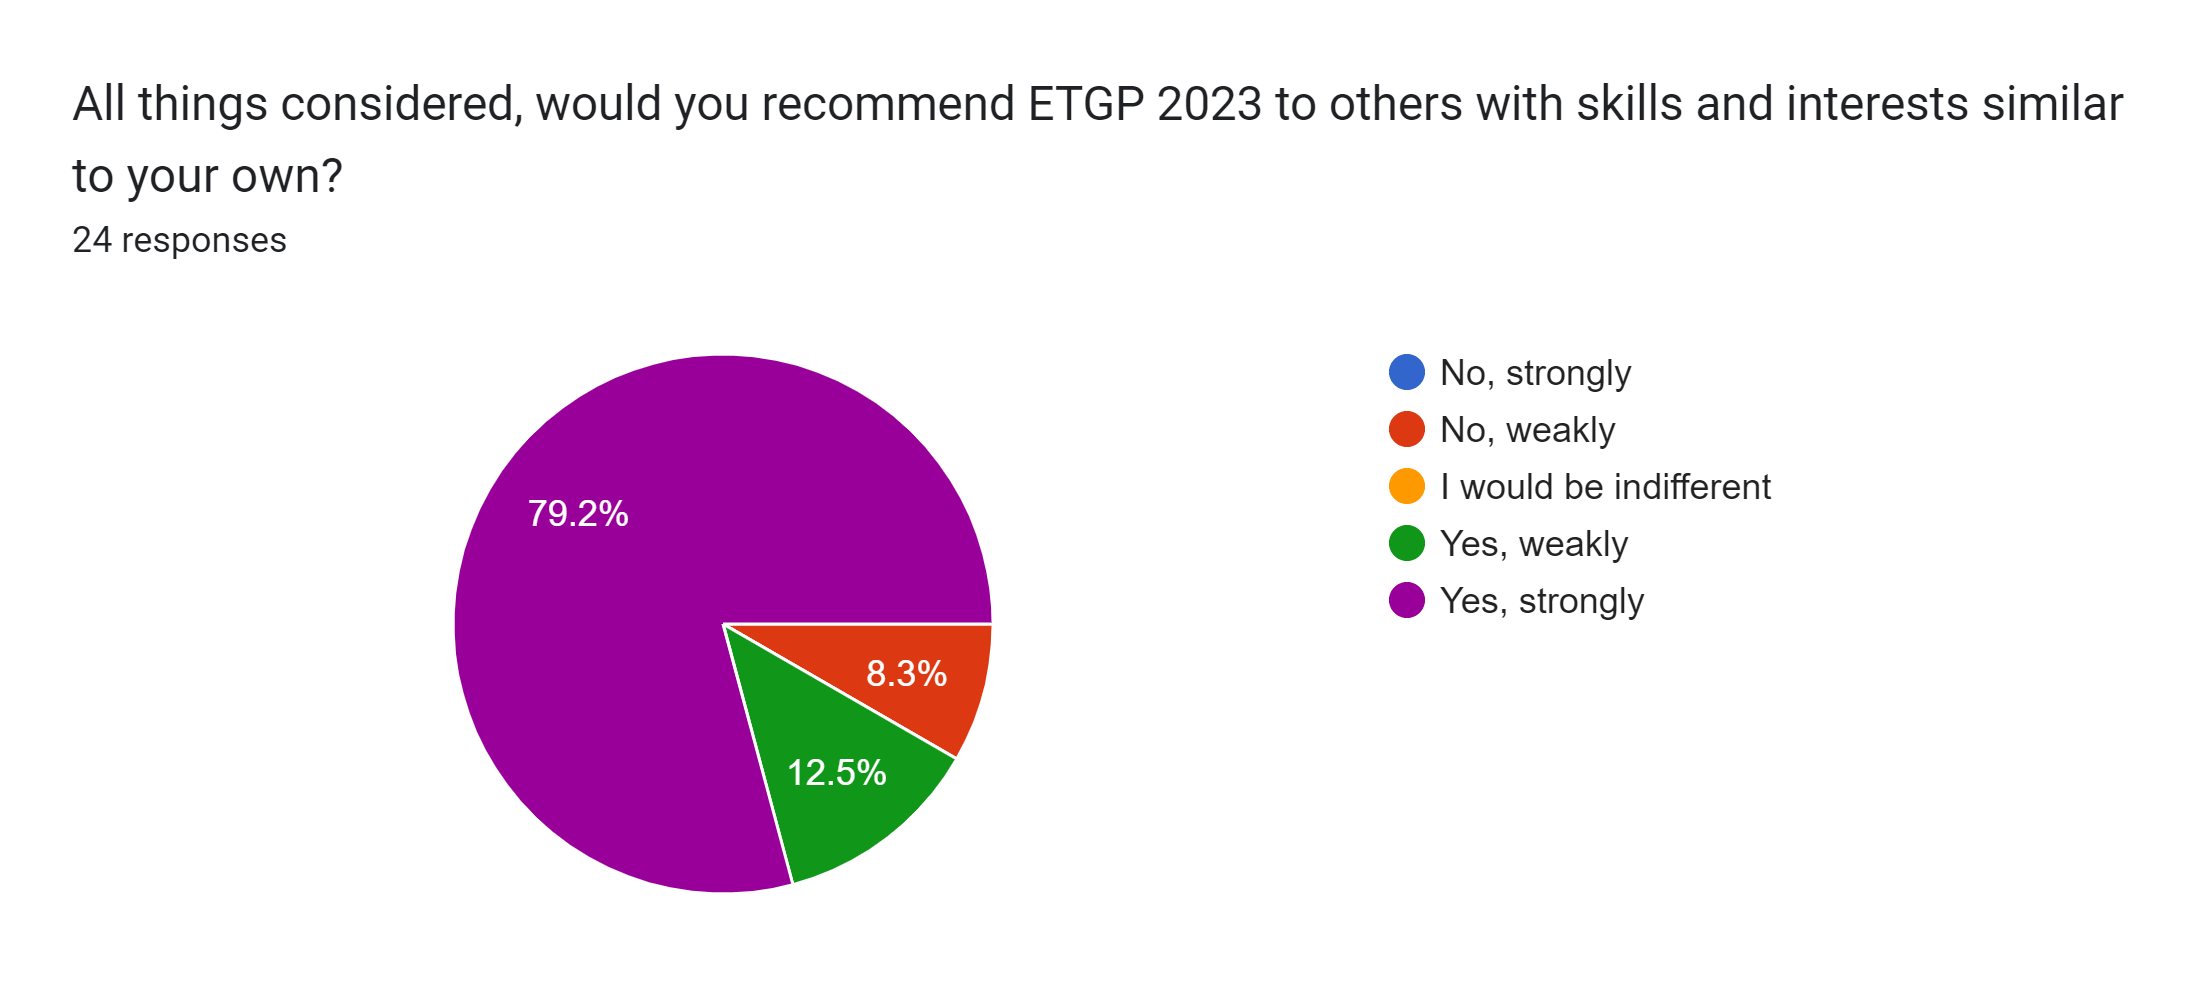 Forms response chart. Question title: All things considered, would you recommend ETGP 2023 to others with skills and interests similar to your own?. Number of responses: 24 responses.